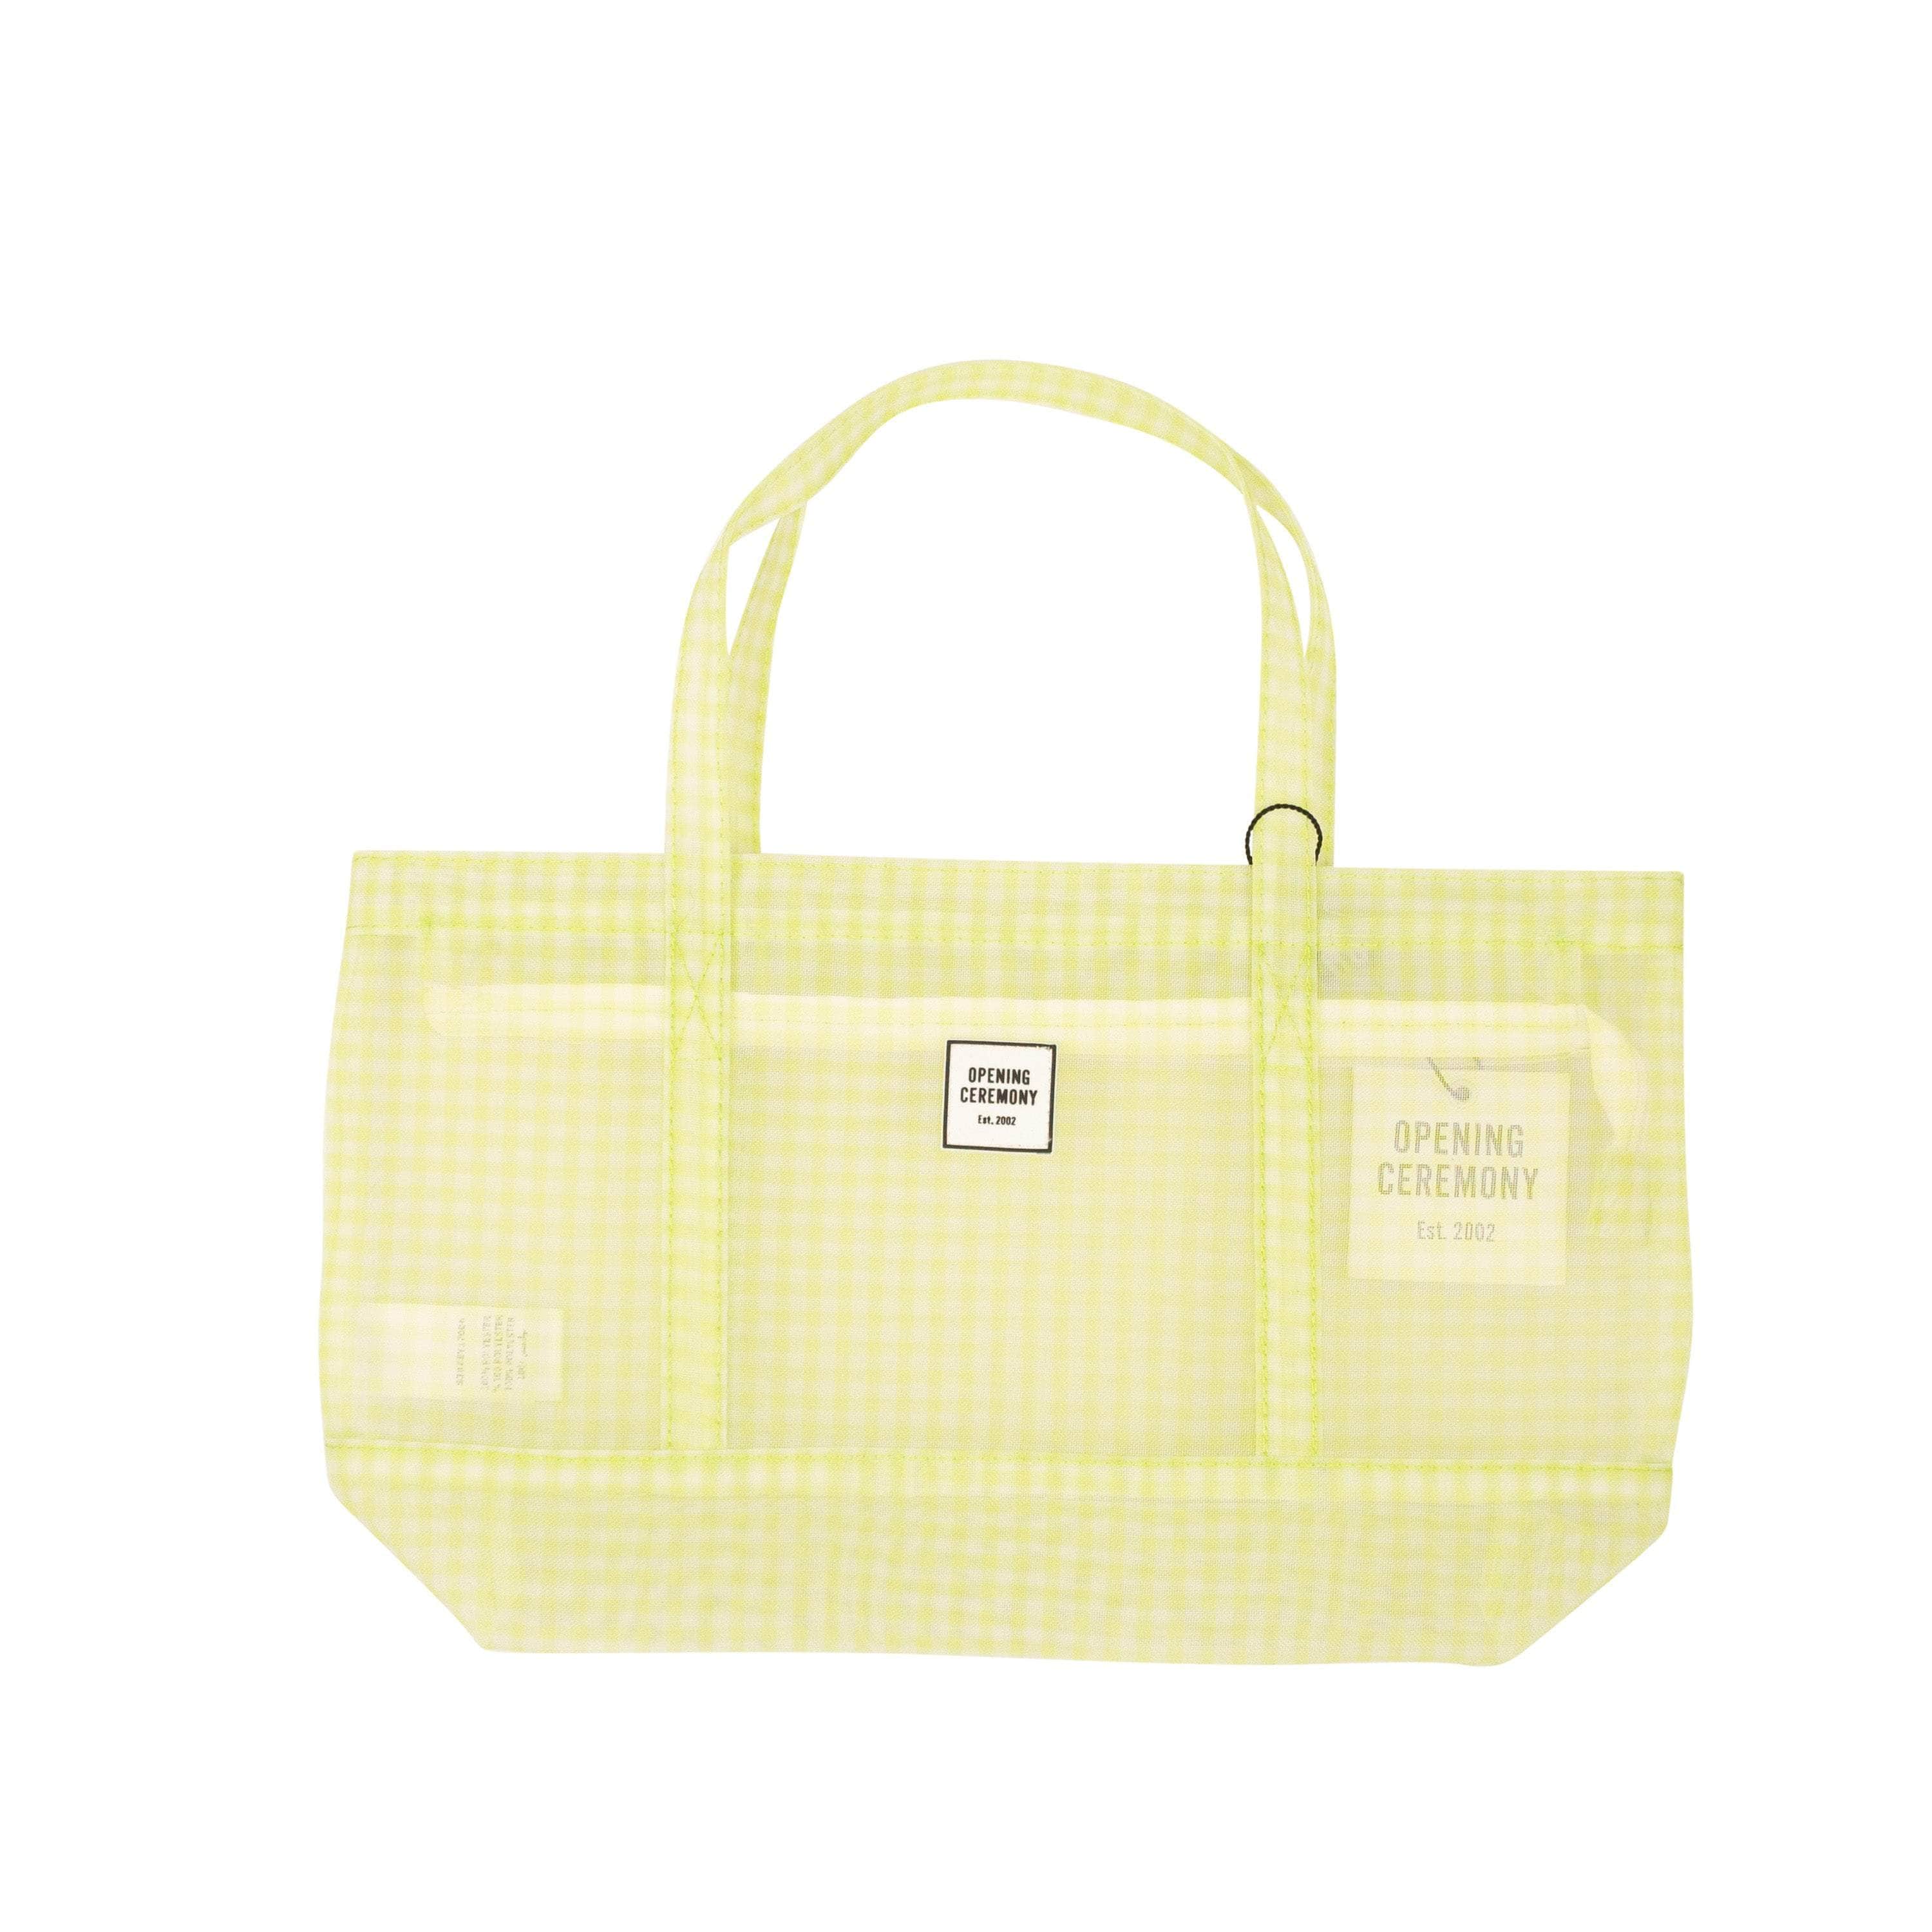 Opening Ceremony channelenable-all, chicmi, couponcollection, gender-mens, gender-womens, main-handbags, mens-shoes, opening-ceremony, size-os, under-250, unisex-bags OS Lime Green Gingham Small Chinatown Tote Bag 95-OCY-3058/OS 95-OCY-3058/OS